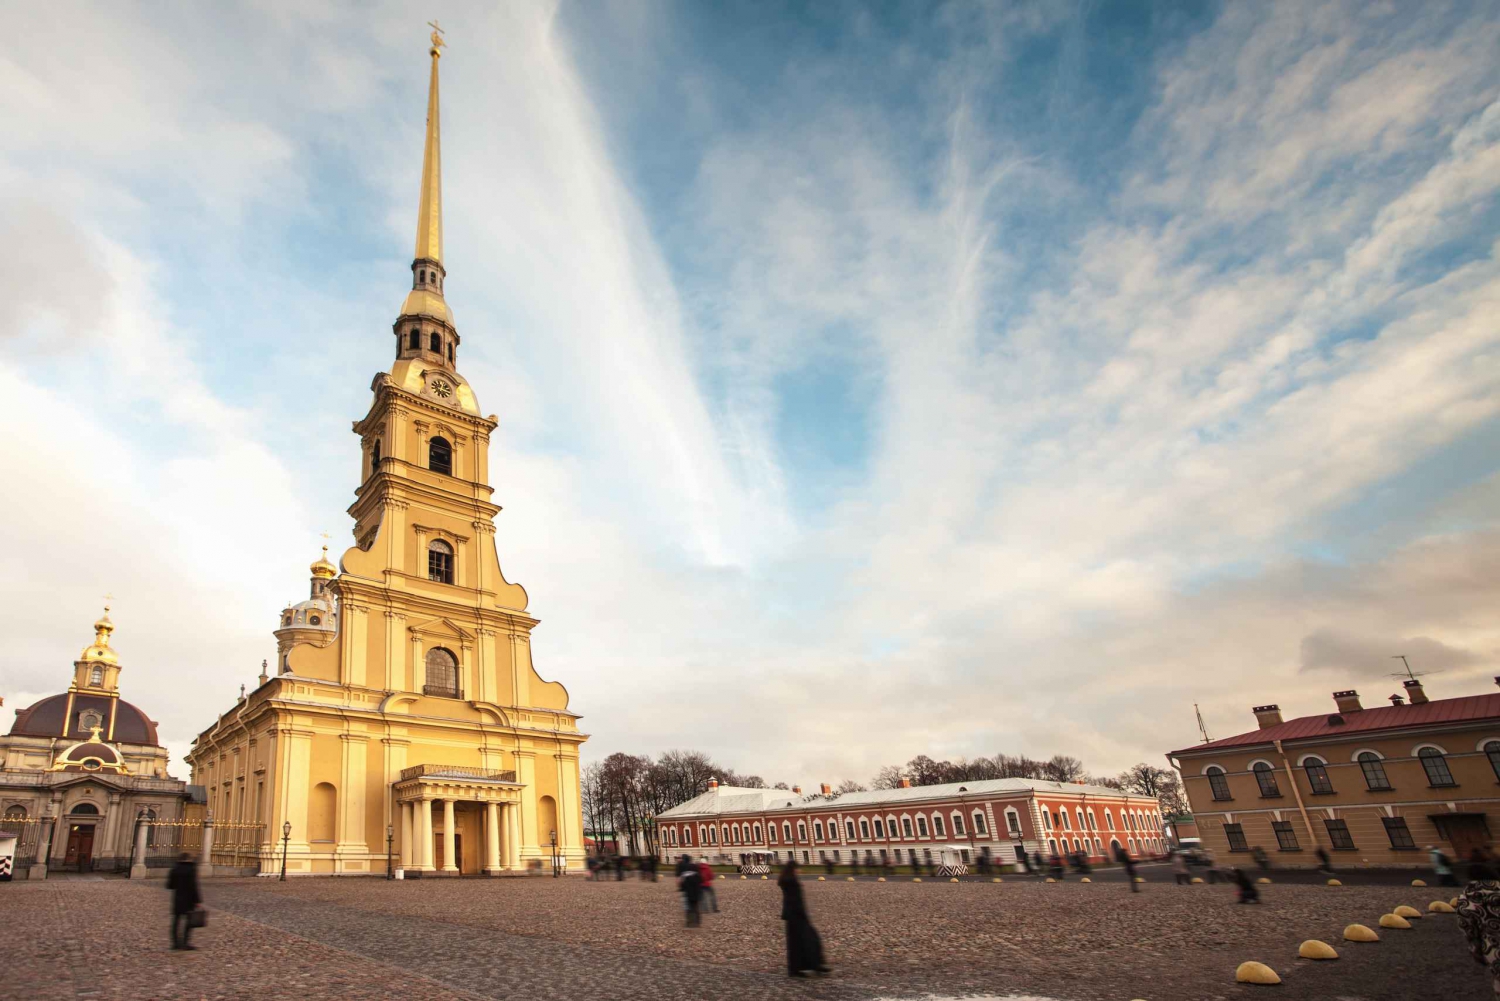 St Petersburg Sightseeing Tour with Peter and Paul Fortress